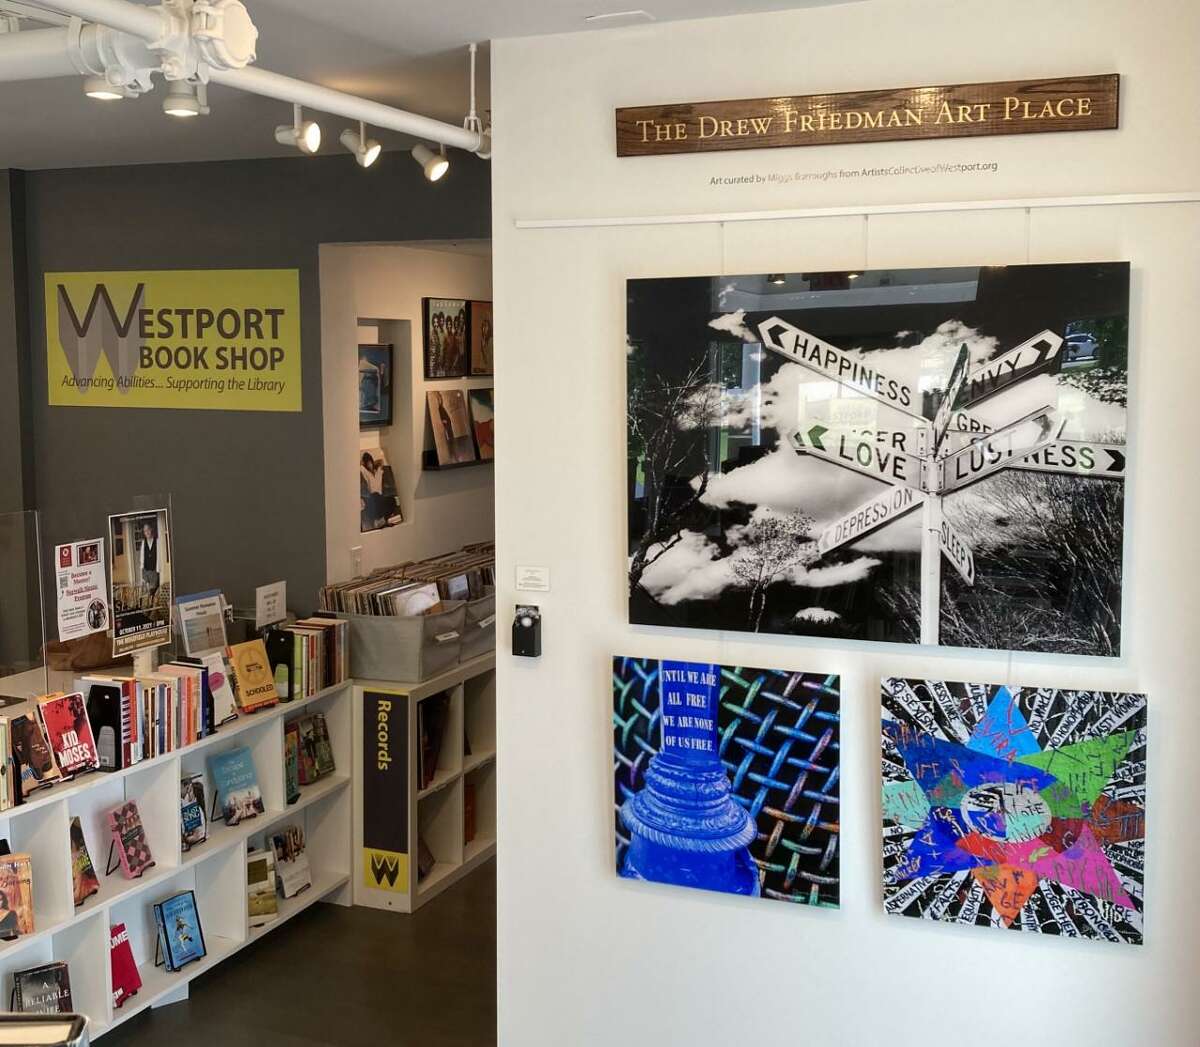 Aritist Joanie Landau is the Westport Book Shop’s guest art exhibitor for the month of August, at the nonprofit used book store’s Drew Friedman Art Place in the store that is dedicated to exhibiting the work of community artists yearround, and on a rotating basis.